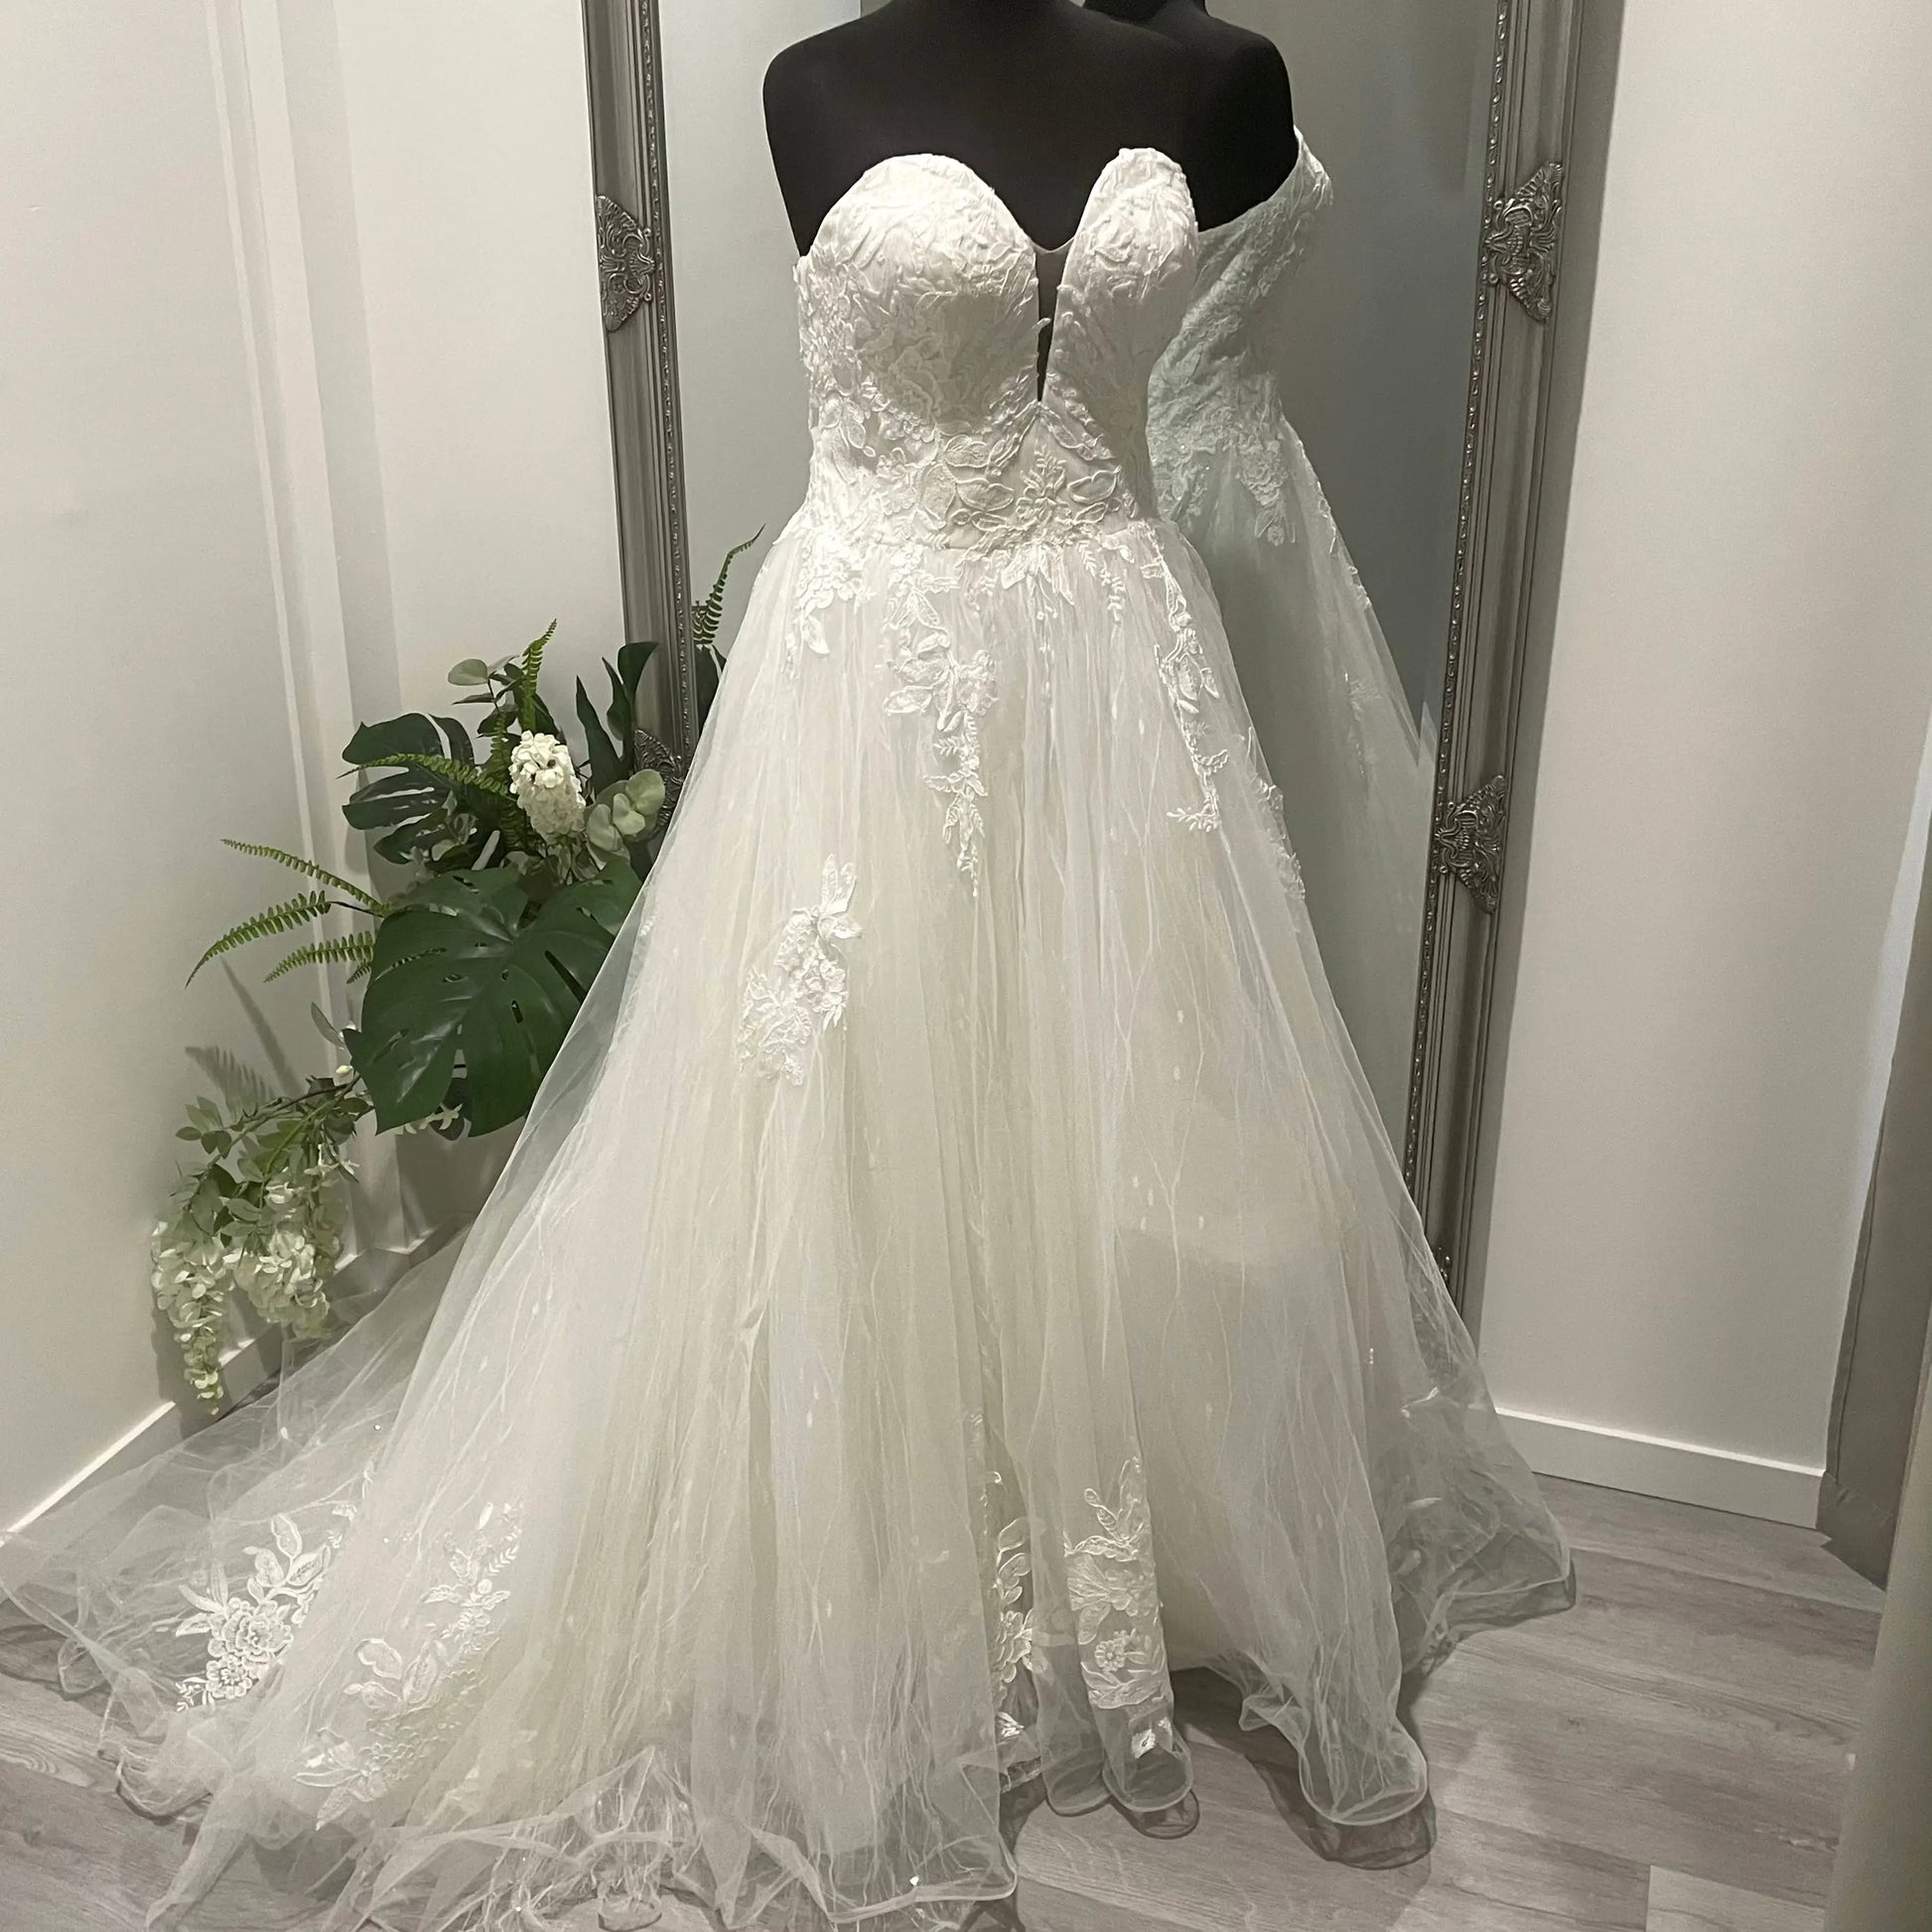 Front view of the Kate wedding gown featuring a sweetheart neckline with a plunging center, adorned with illusion skin tone tulle and lace appliqué, creating a stunning and elegant bridal look.